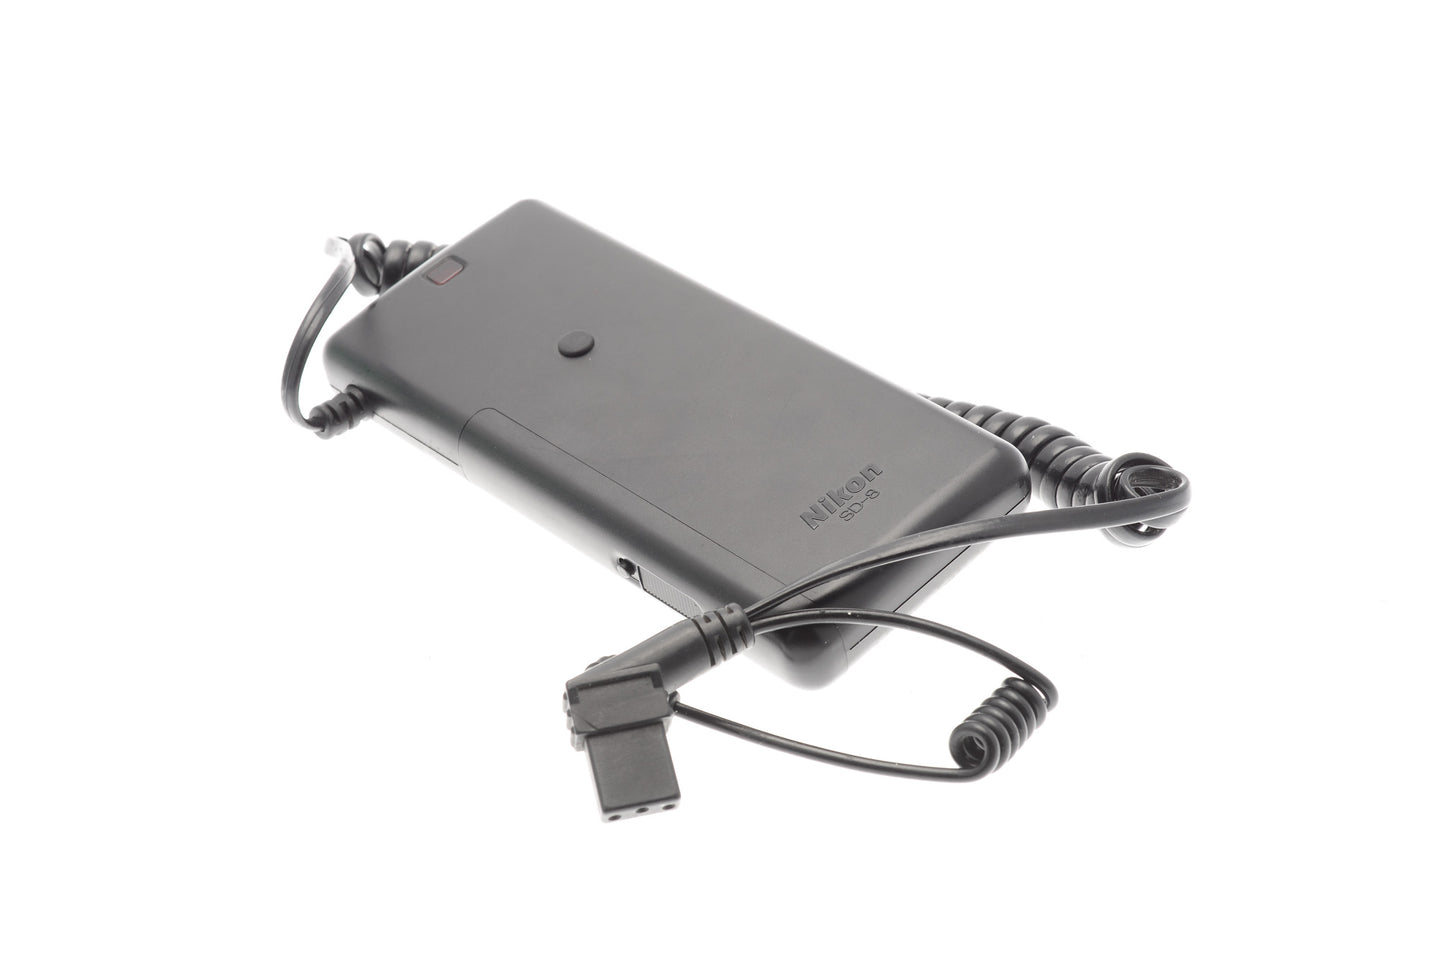 Nikon Battery Pack SD-8 - Accessory